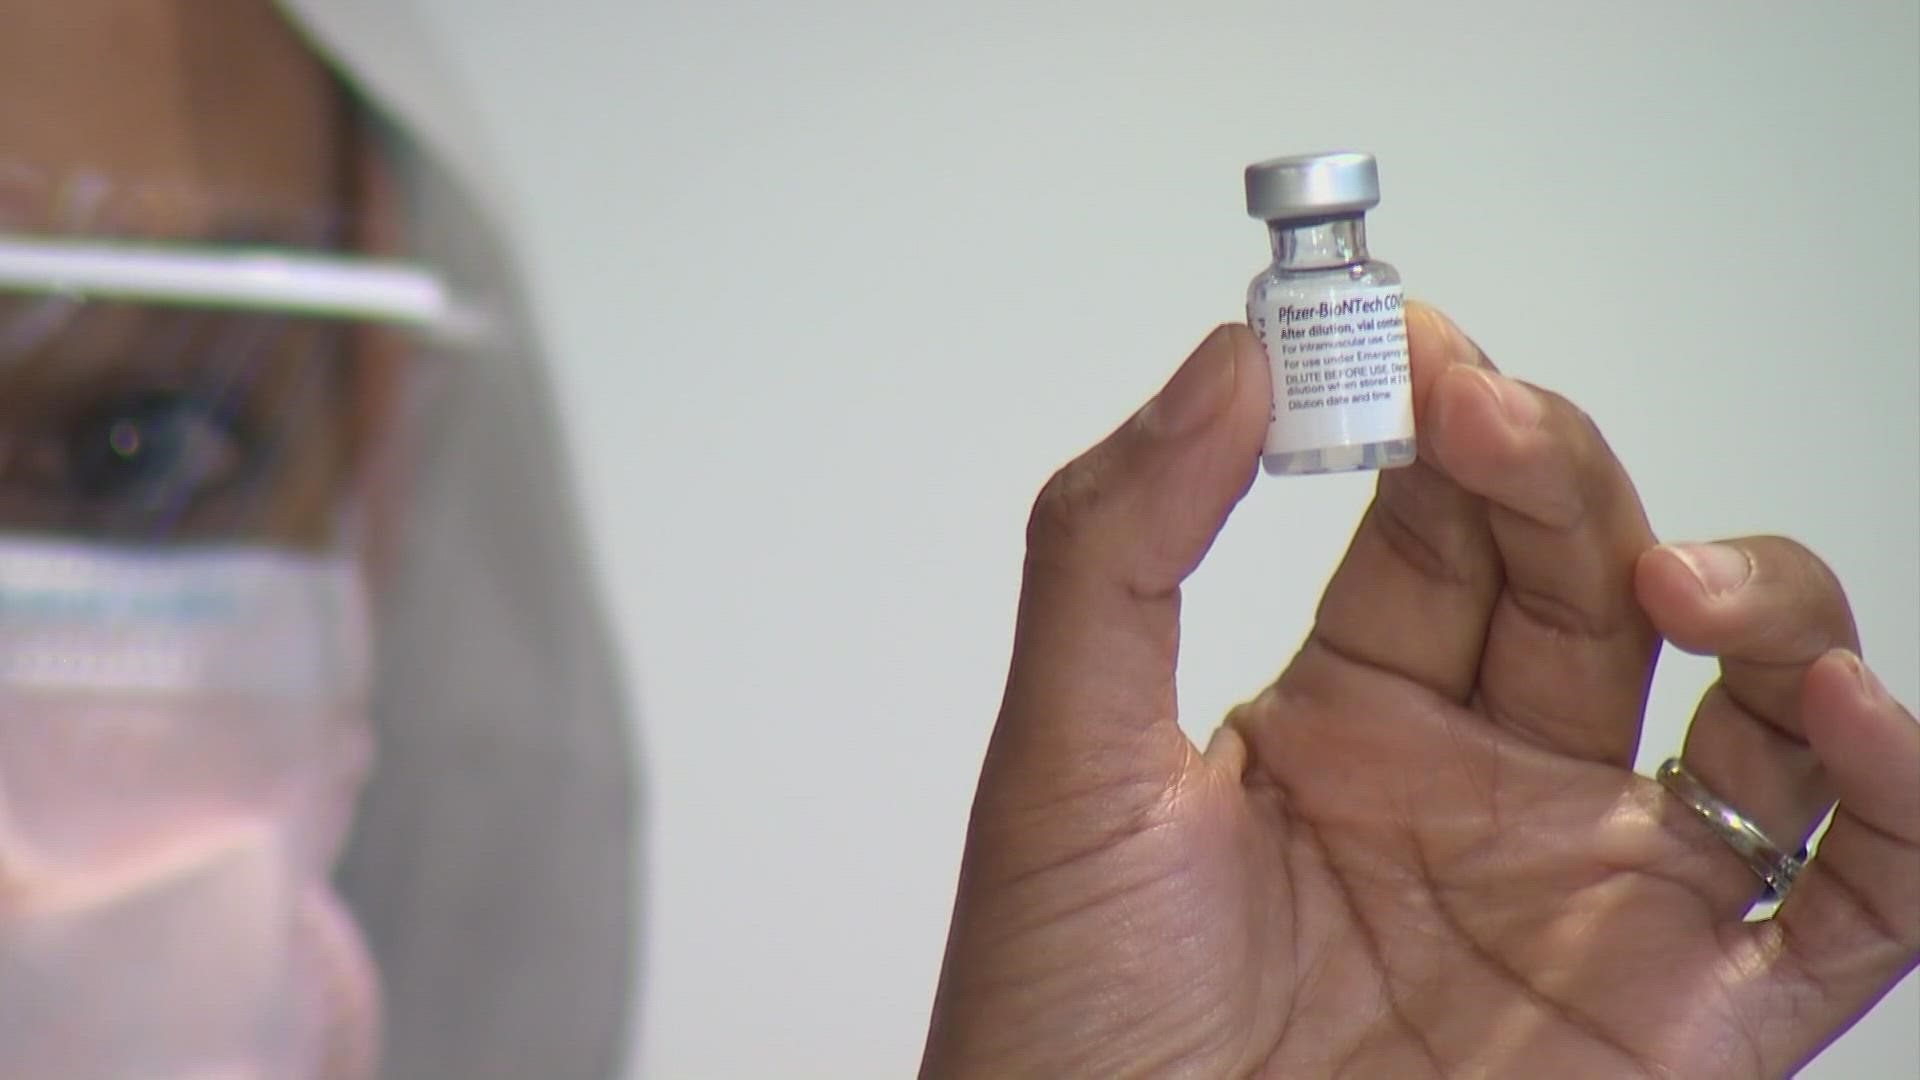 Washington state employees are required to be fully vaccinated by Oct. 18 unless they have a religious or medical exemption.